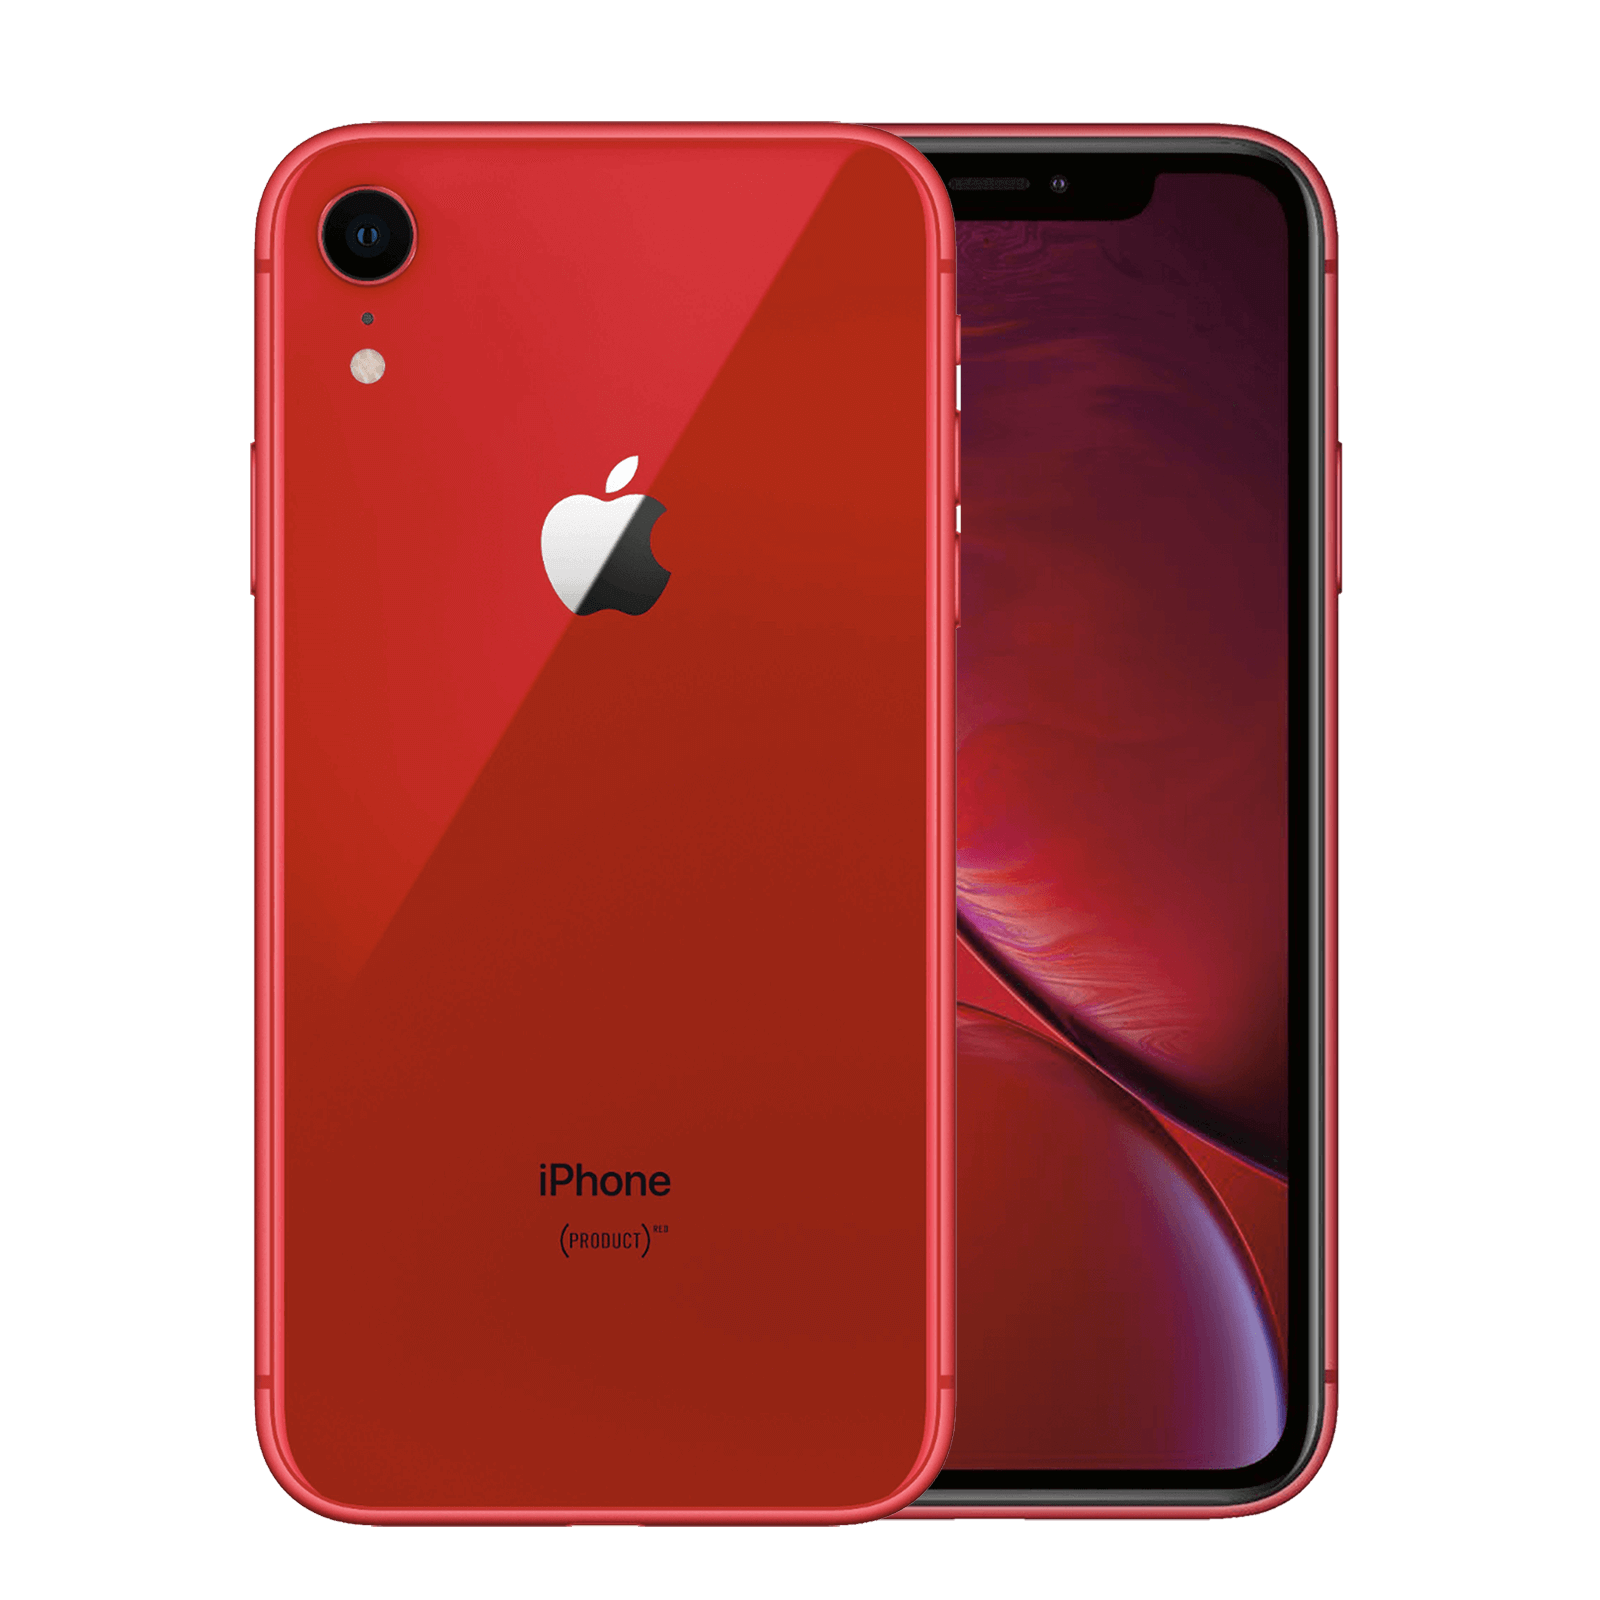 Apple iPhone XR 64GB Product Red Very Good - AT&T